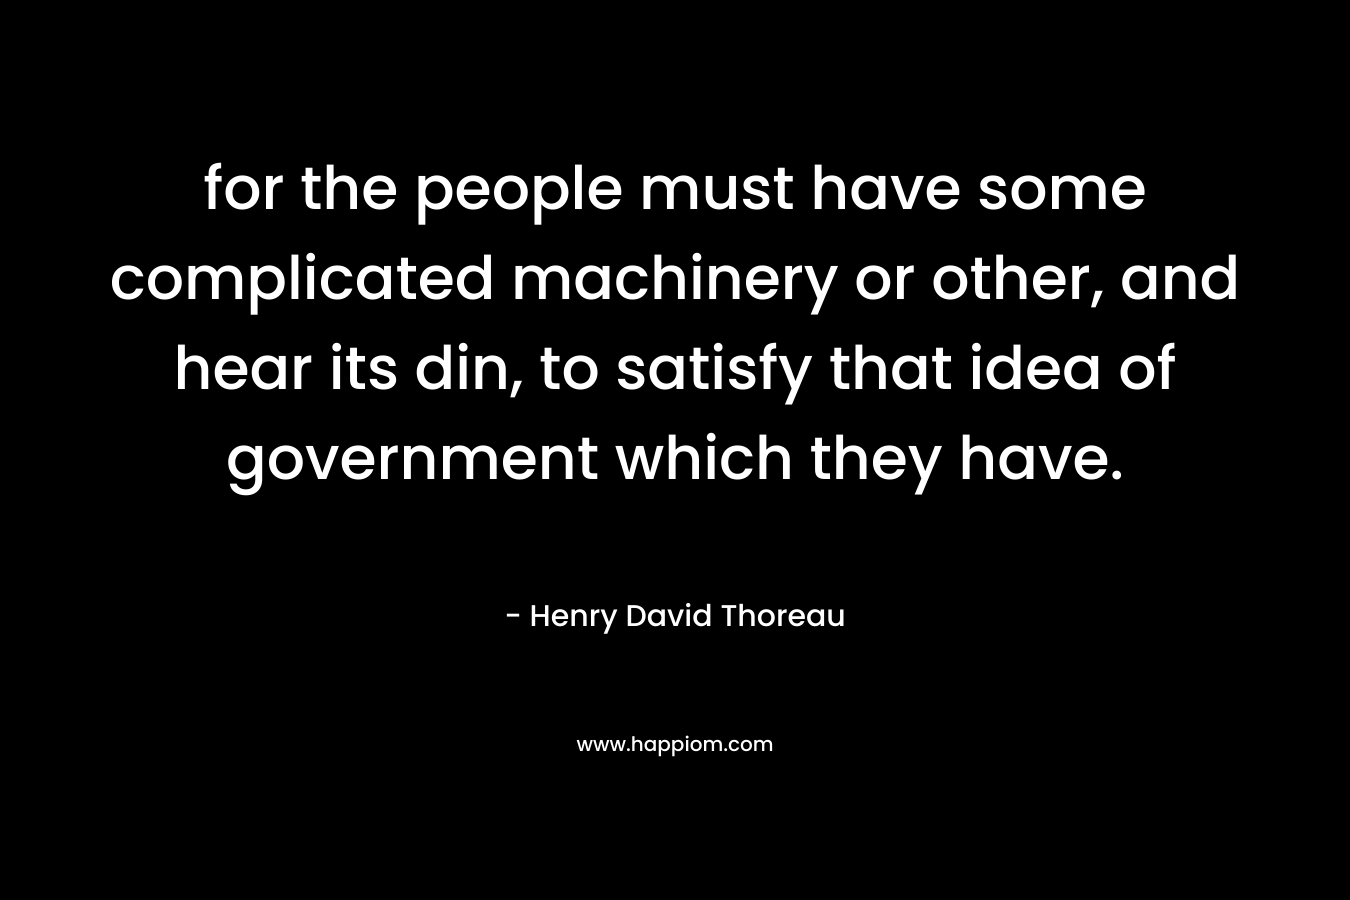 for the people must have some complicated machinery or other, and hear its din, to satisfy that idea of government which they have.